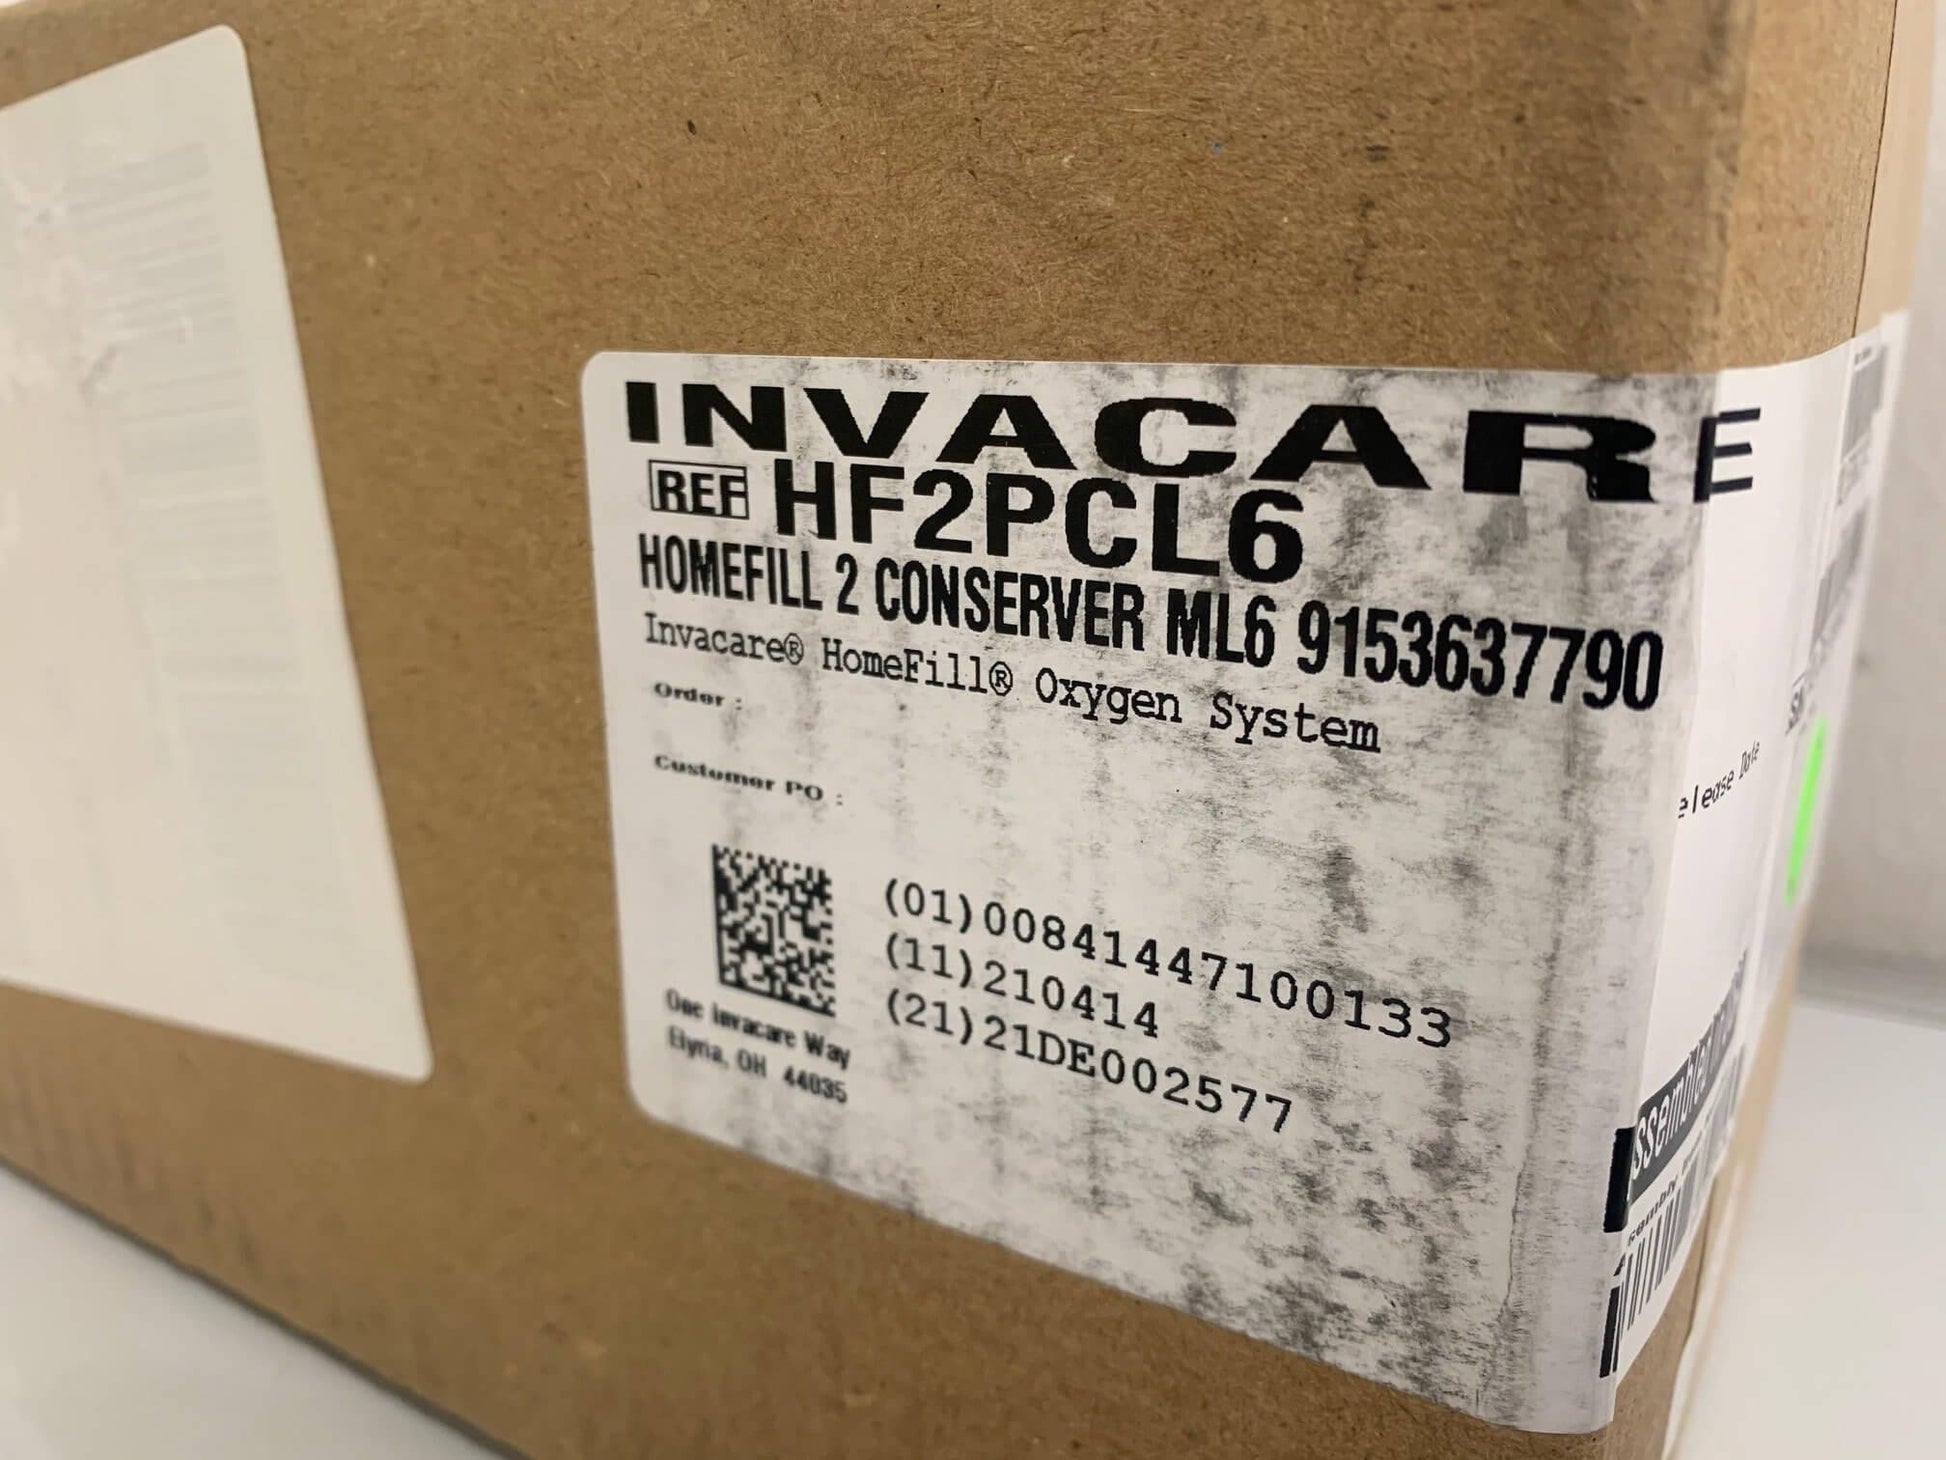 NEW Invacare HomeFill Integrated Conserver ML6 Cylinder Tank with Warranty & FREE Shipping - MBR Medicals